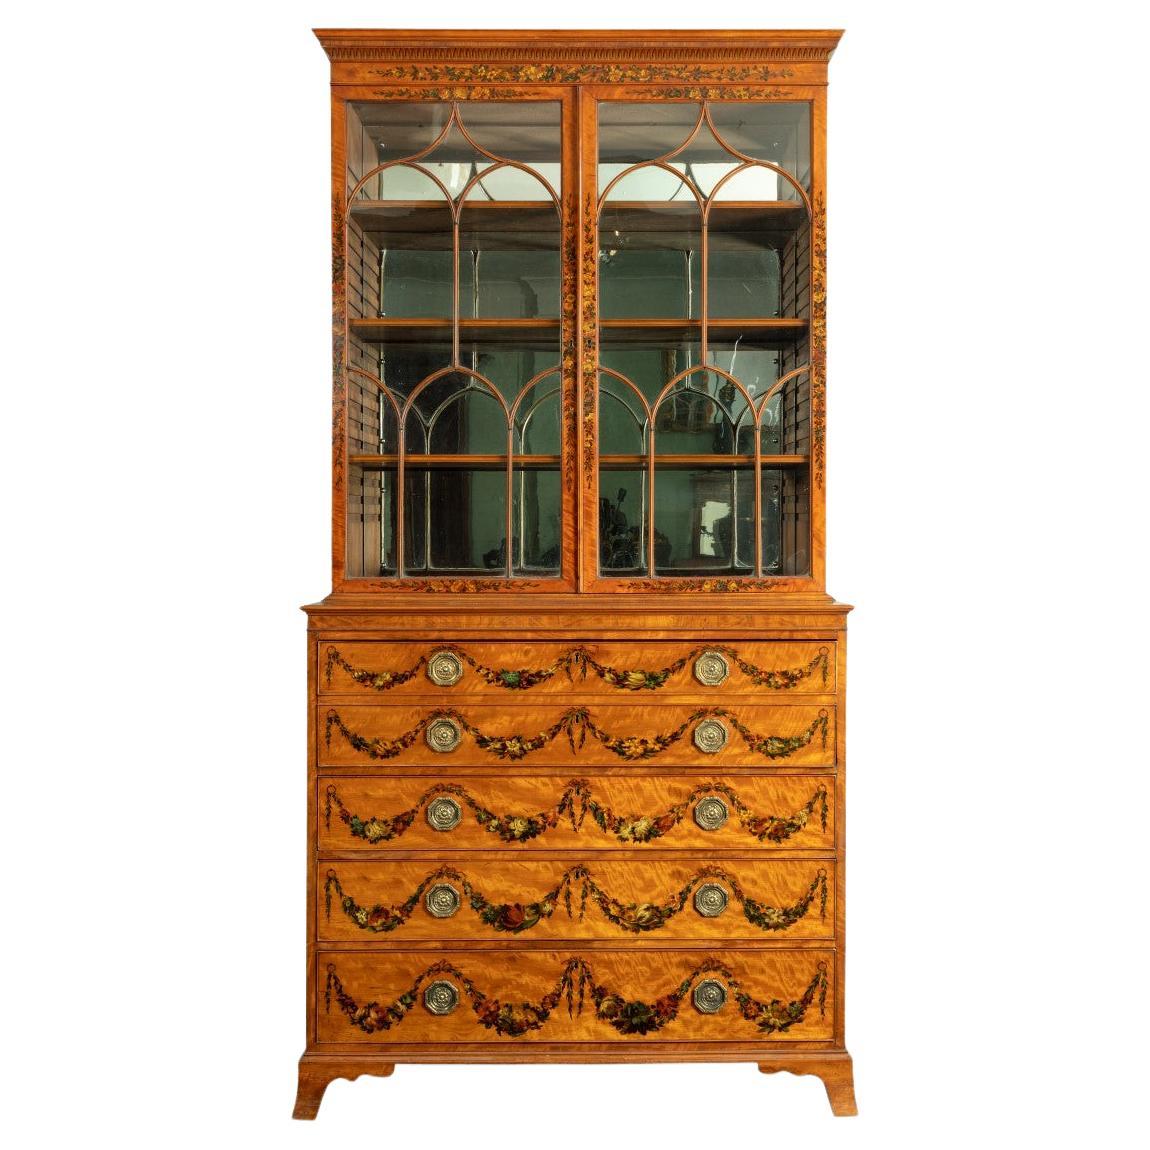 A Sheraton period West Indian satinwood secretaire bookcase